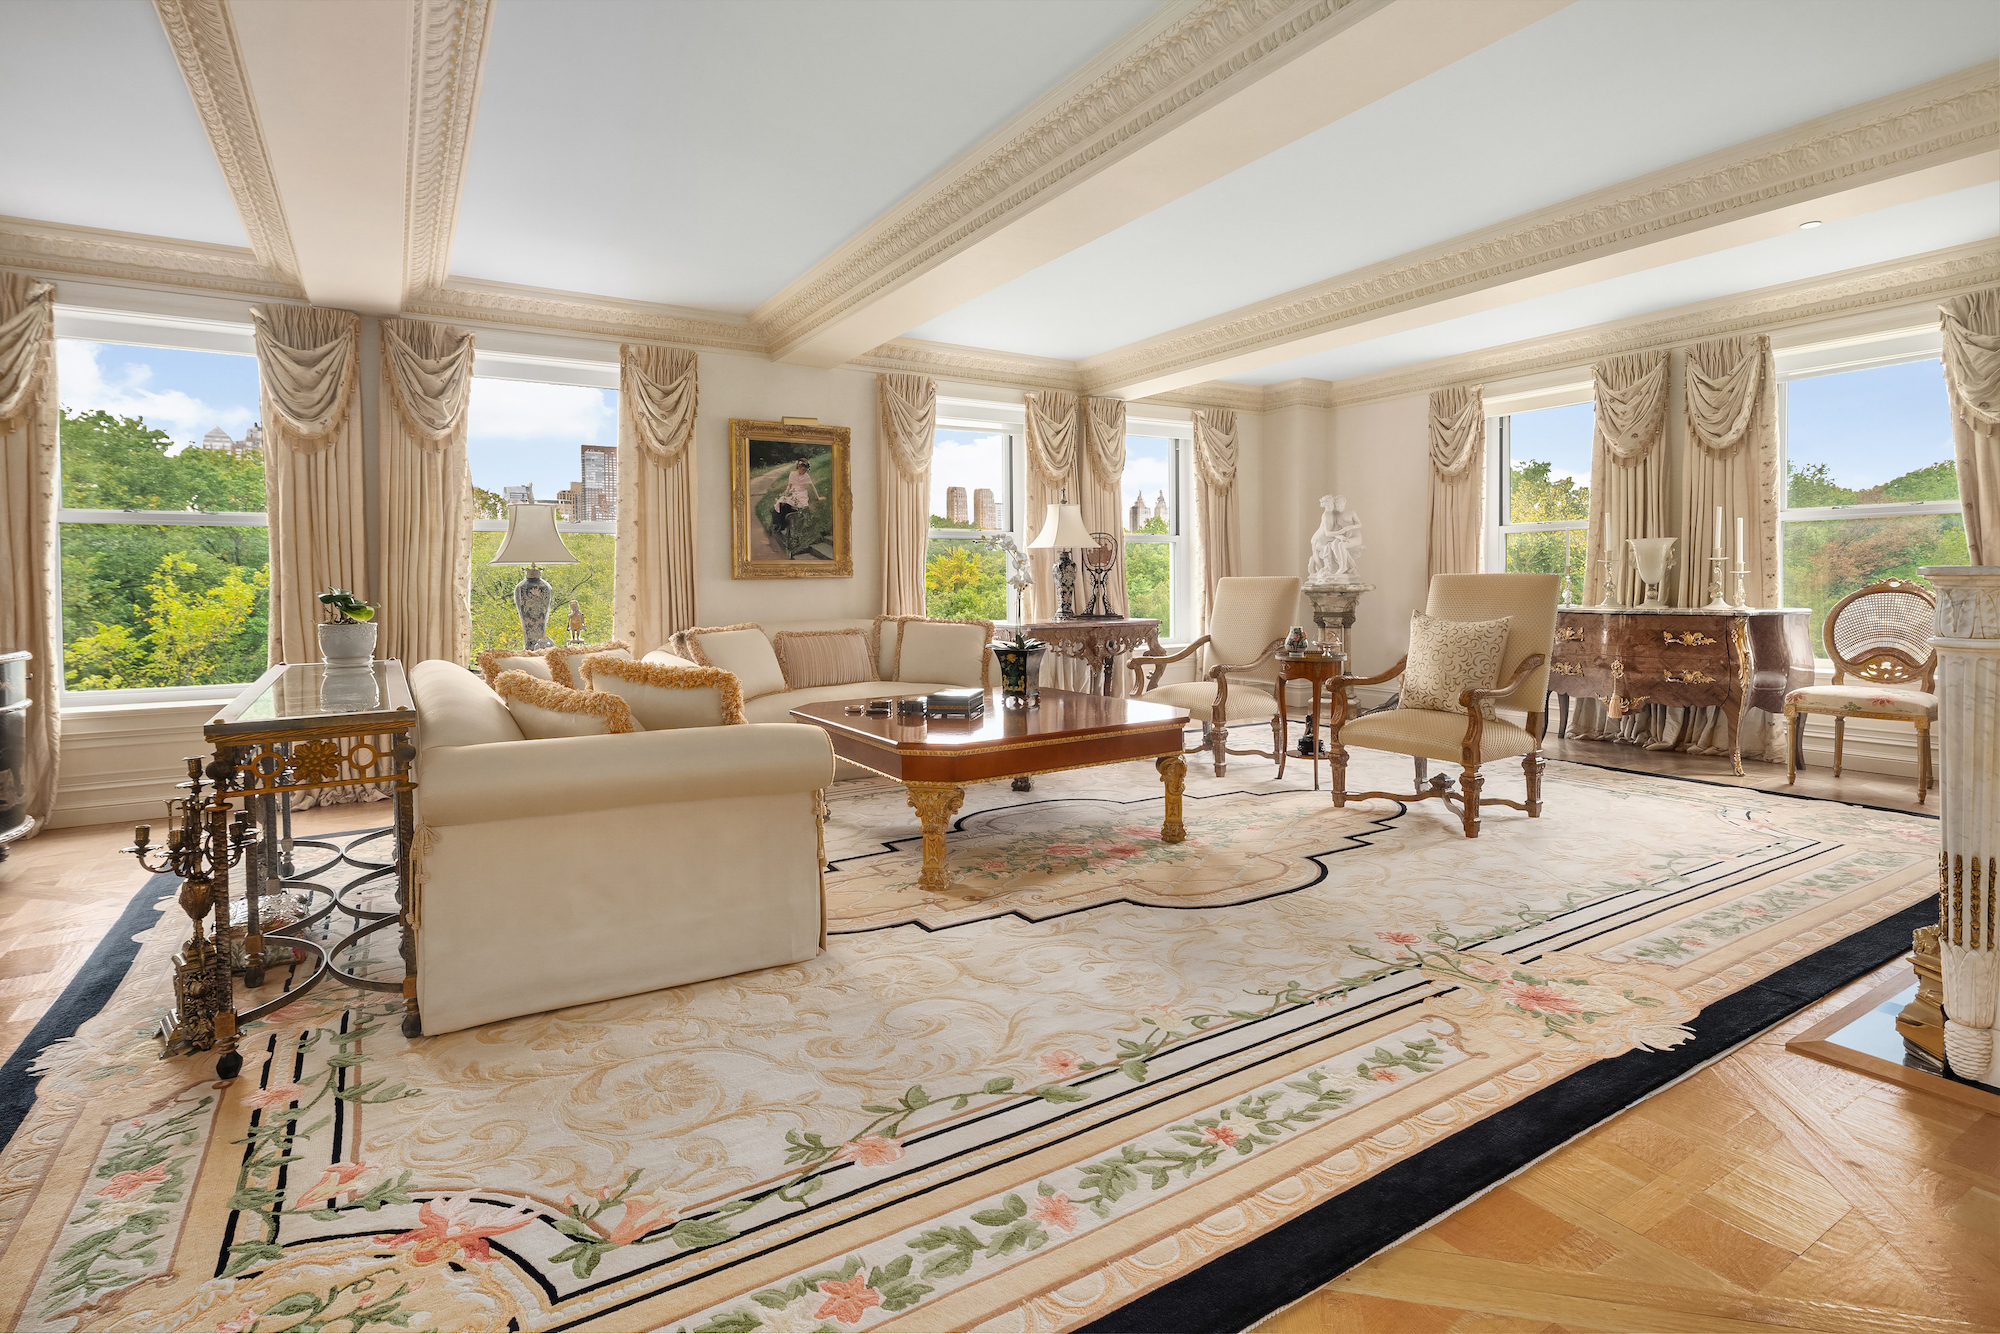 Barbara Walters' $17.75M Upper East Side apartment finds buyer